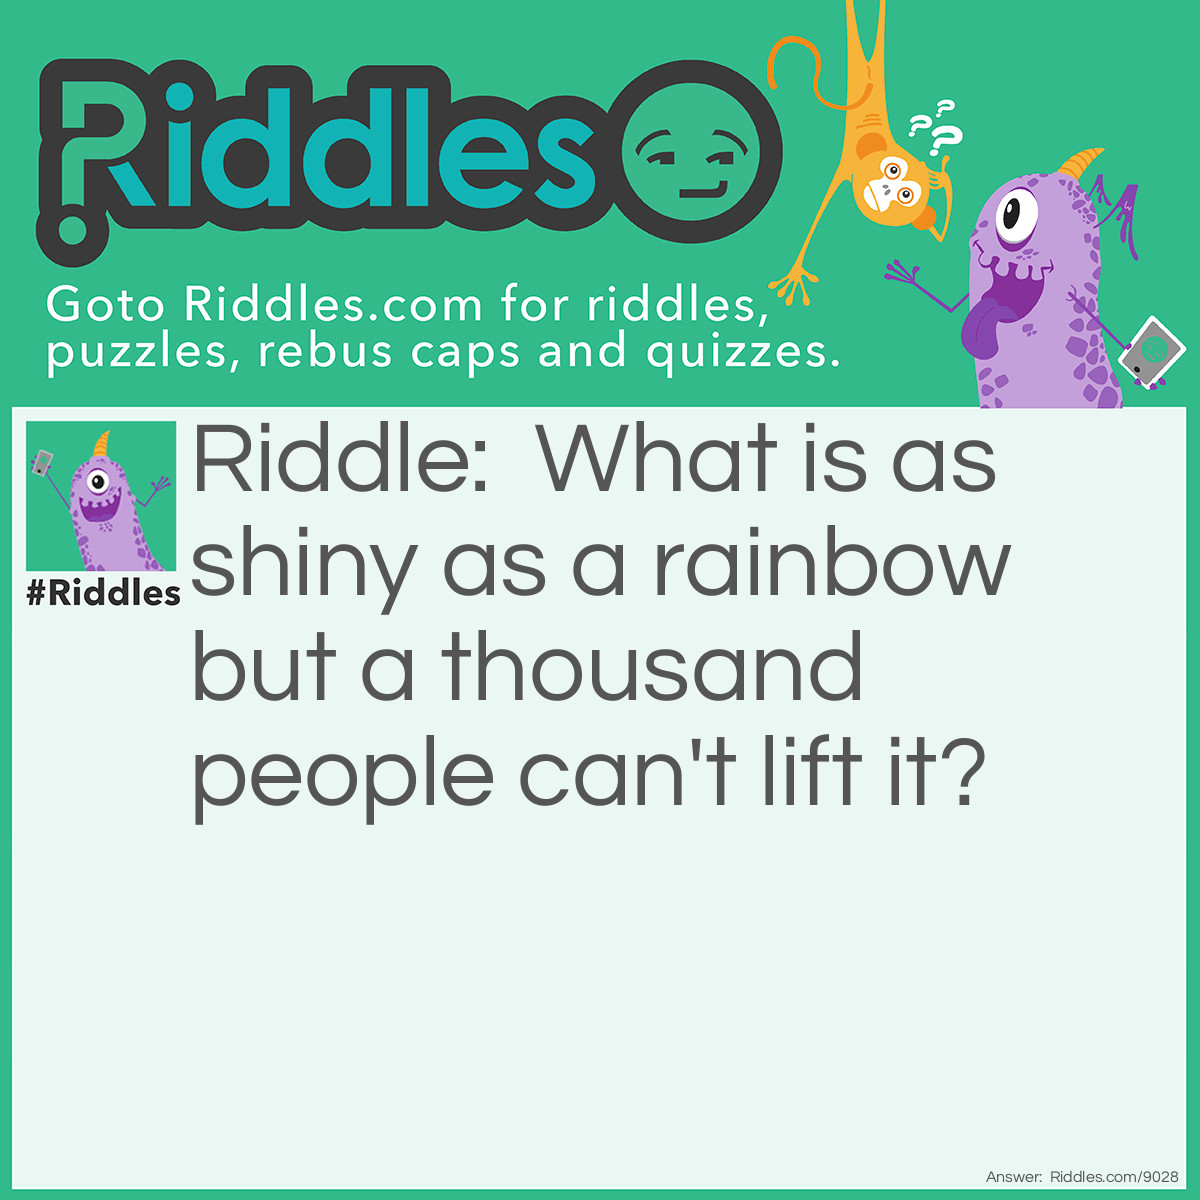 Riddle: What is as shiny as a rainbow but a thousand people can't lift it? Answer: A bubble.